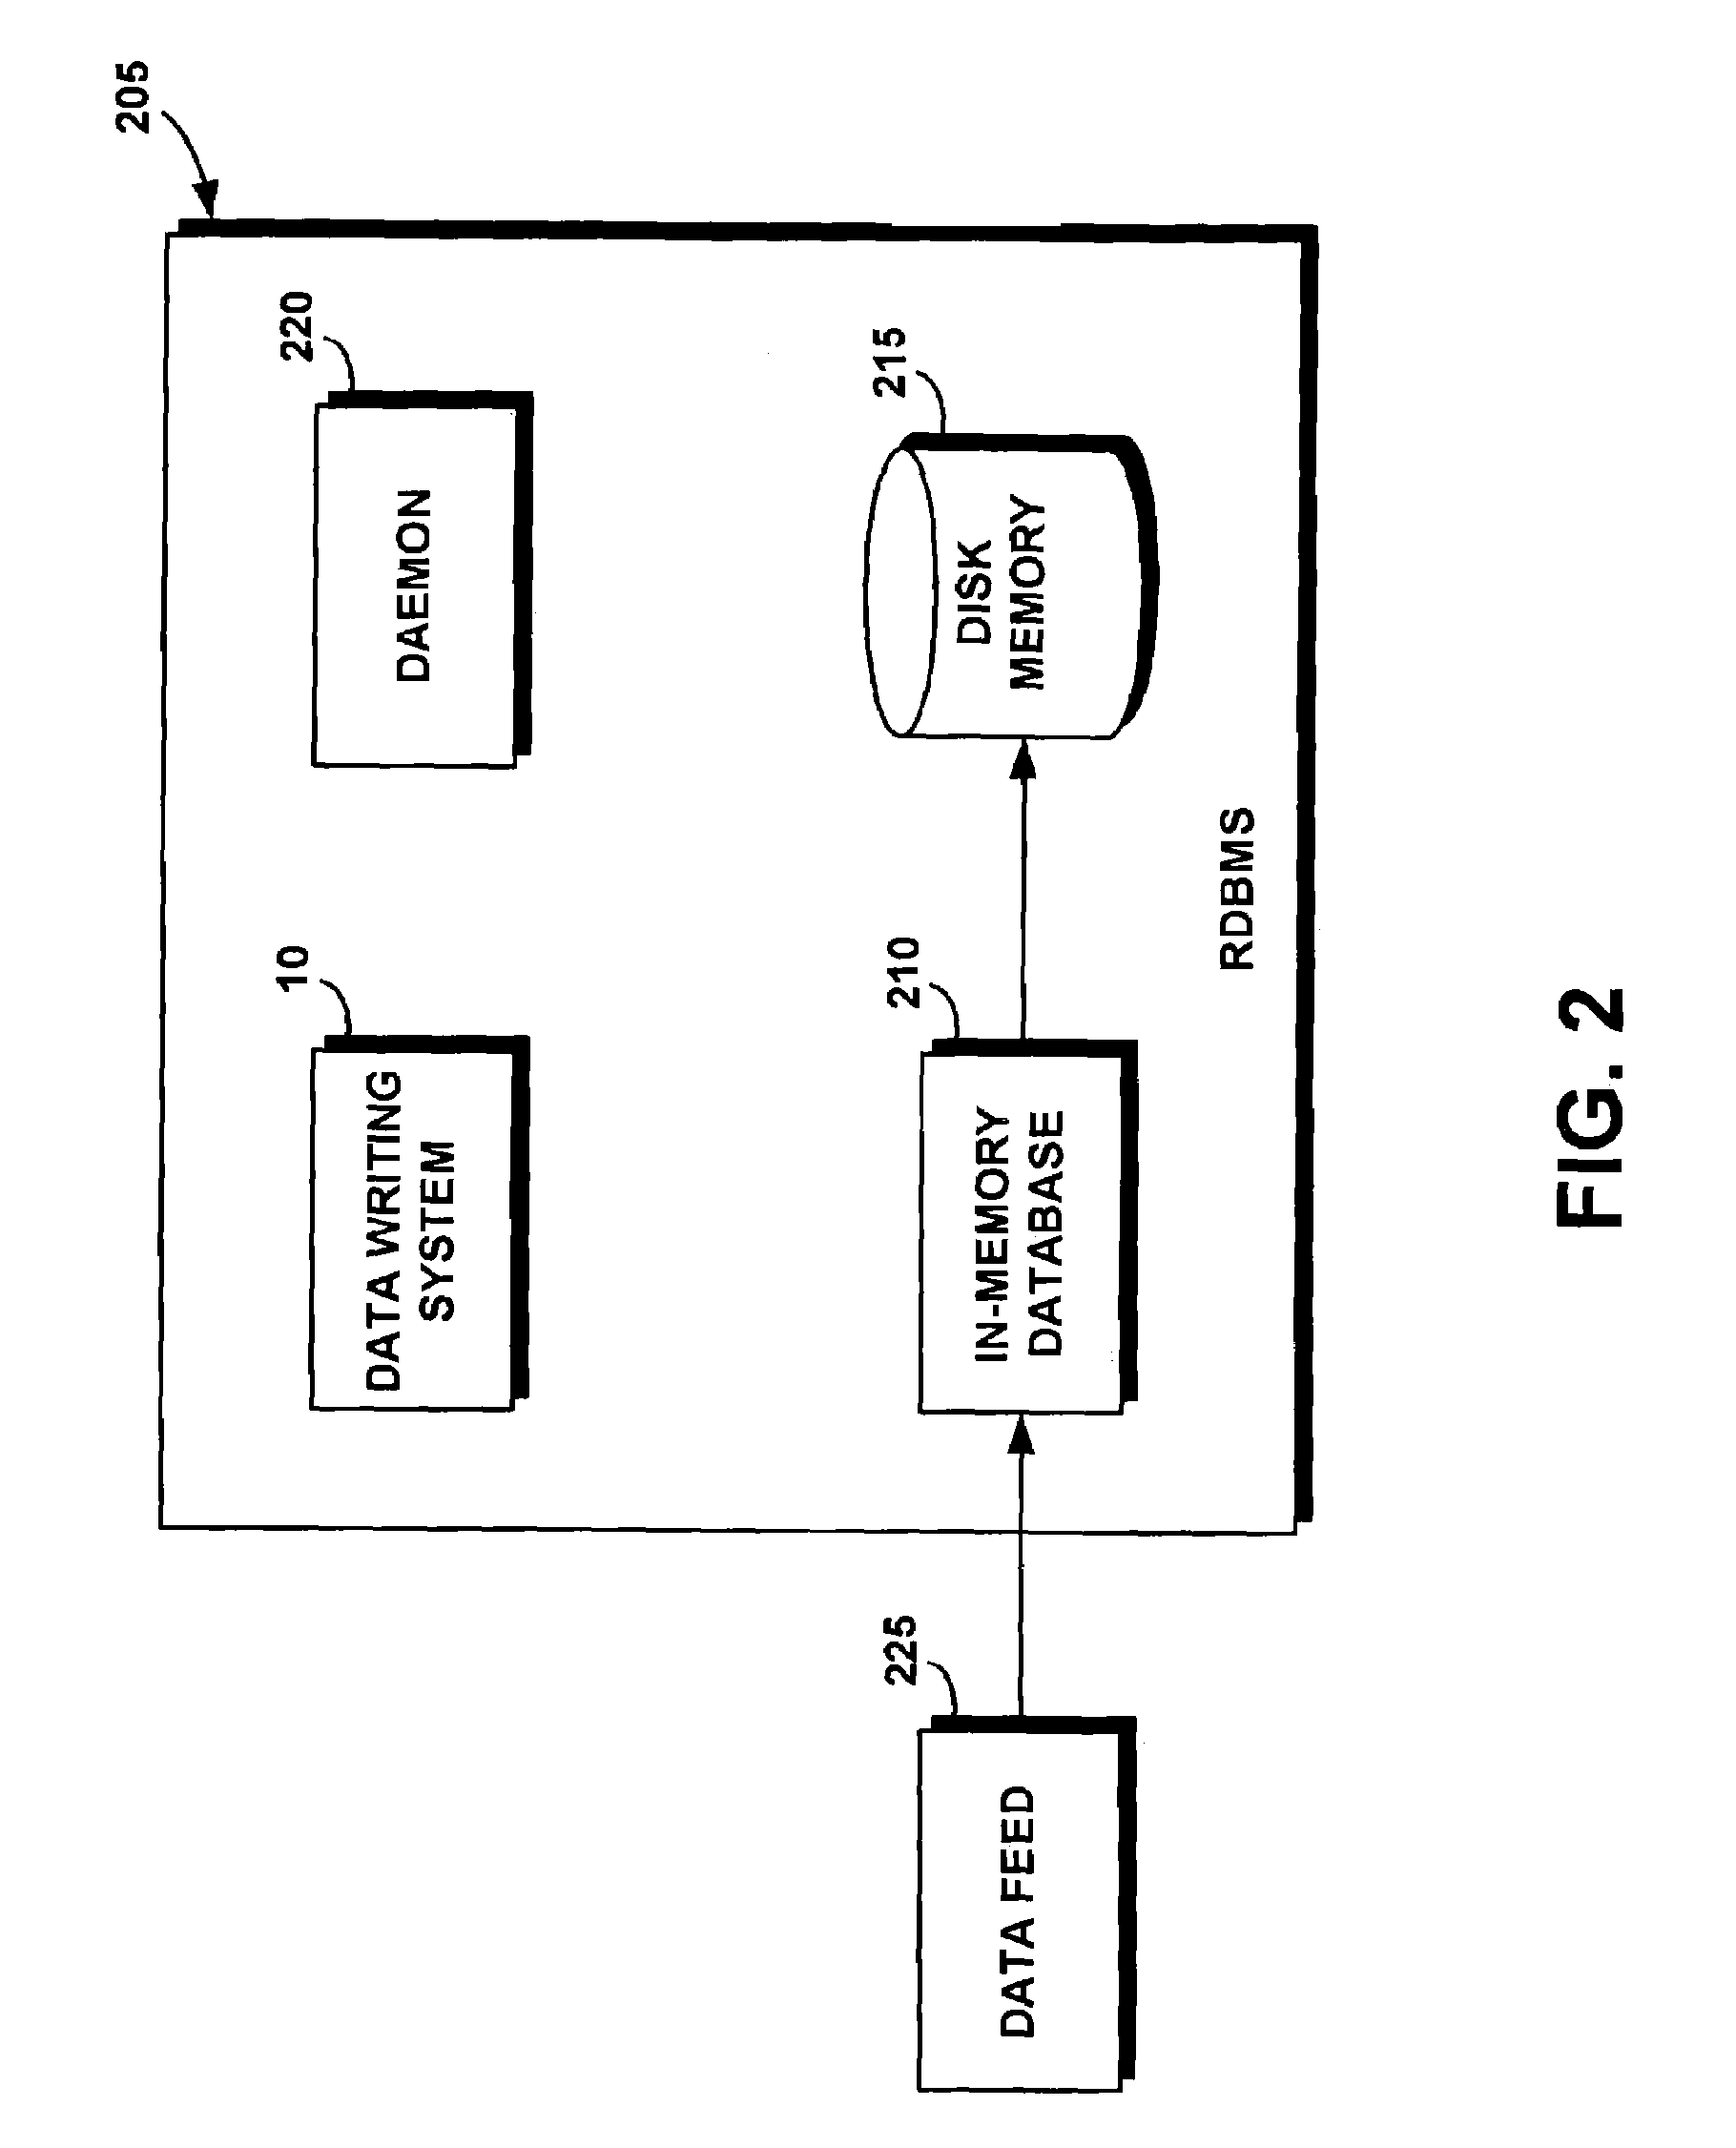 System and method for efficiently writing data from an in-memory database to a disk database